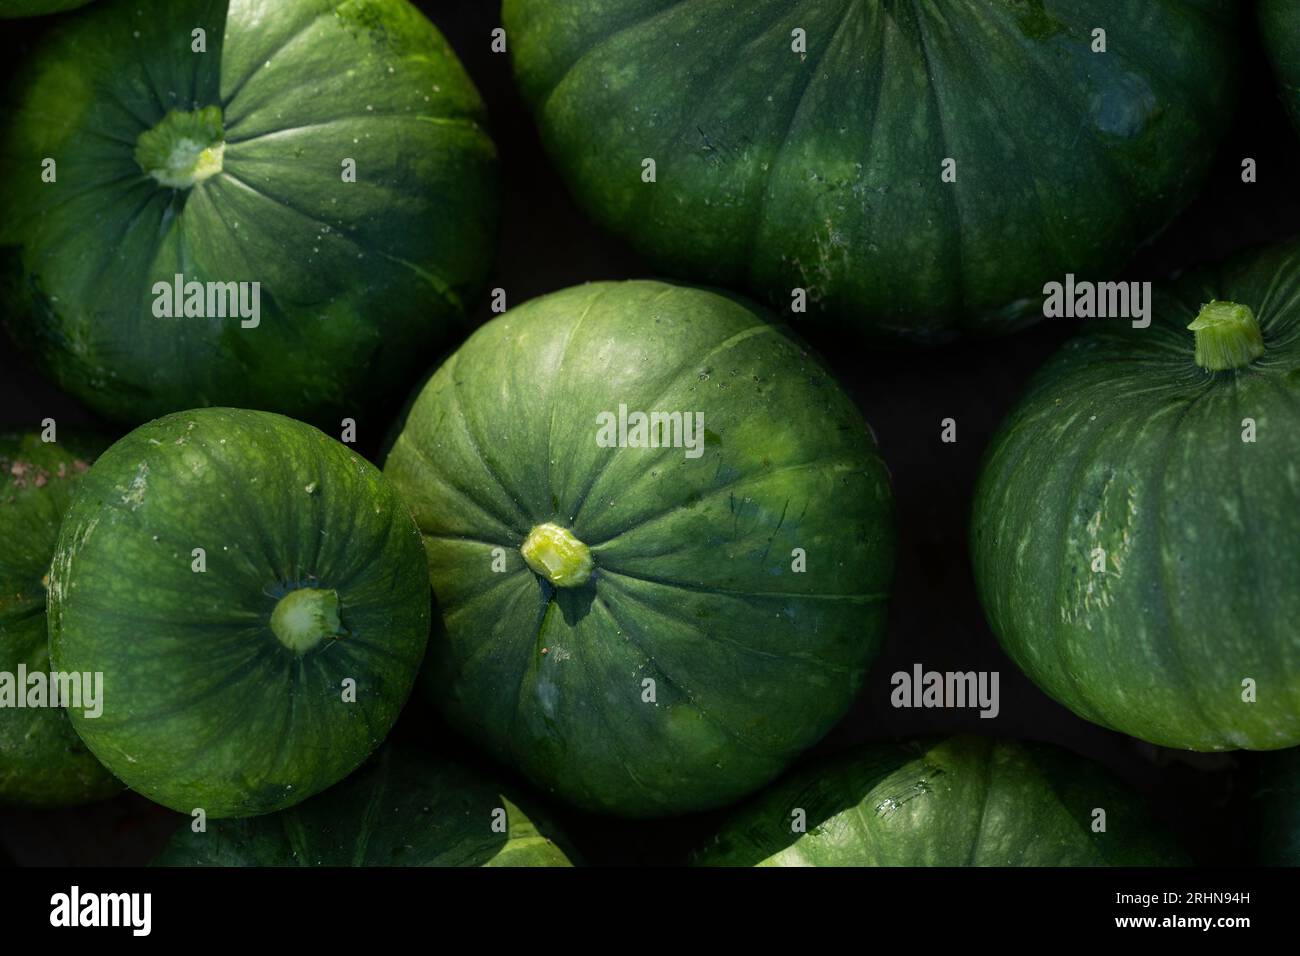 Detail close up of round green squash gourds Stock Photo